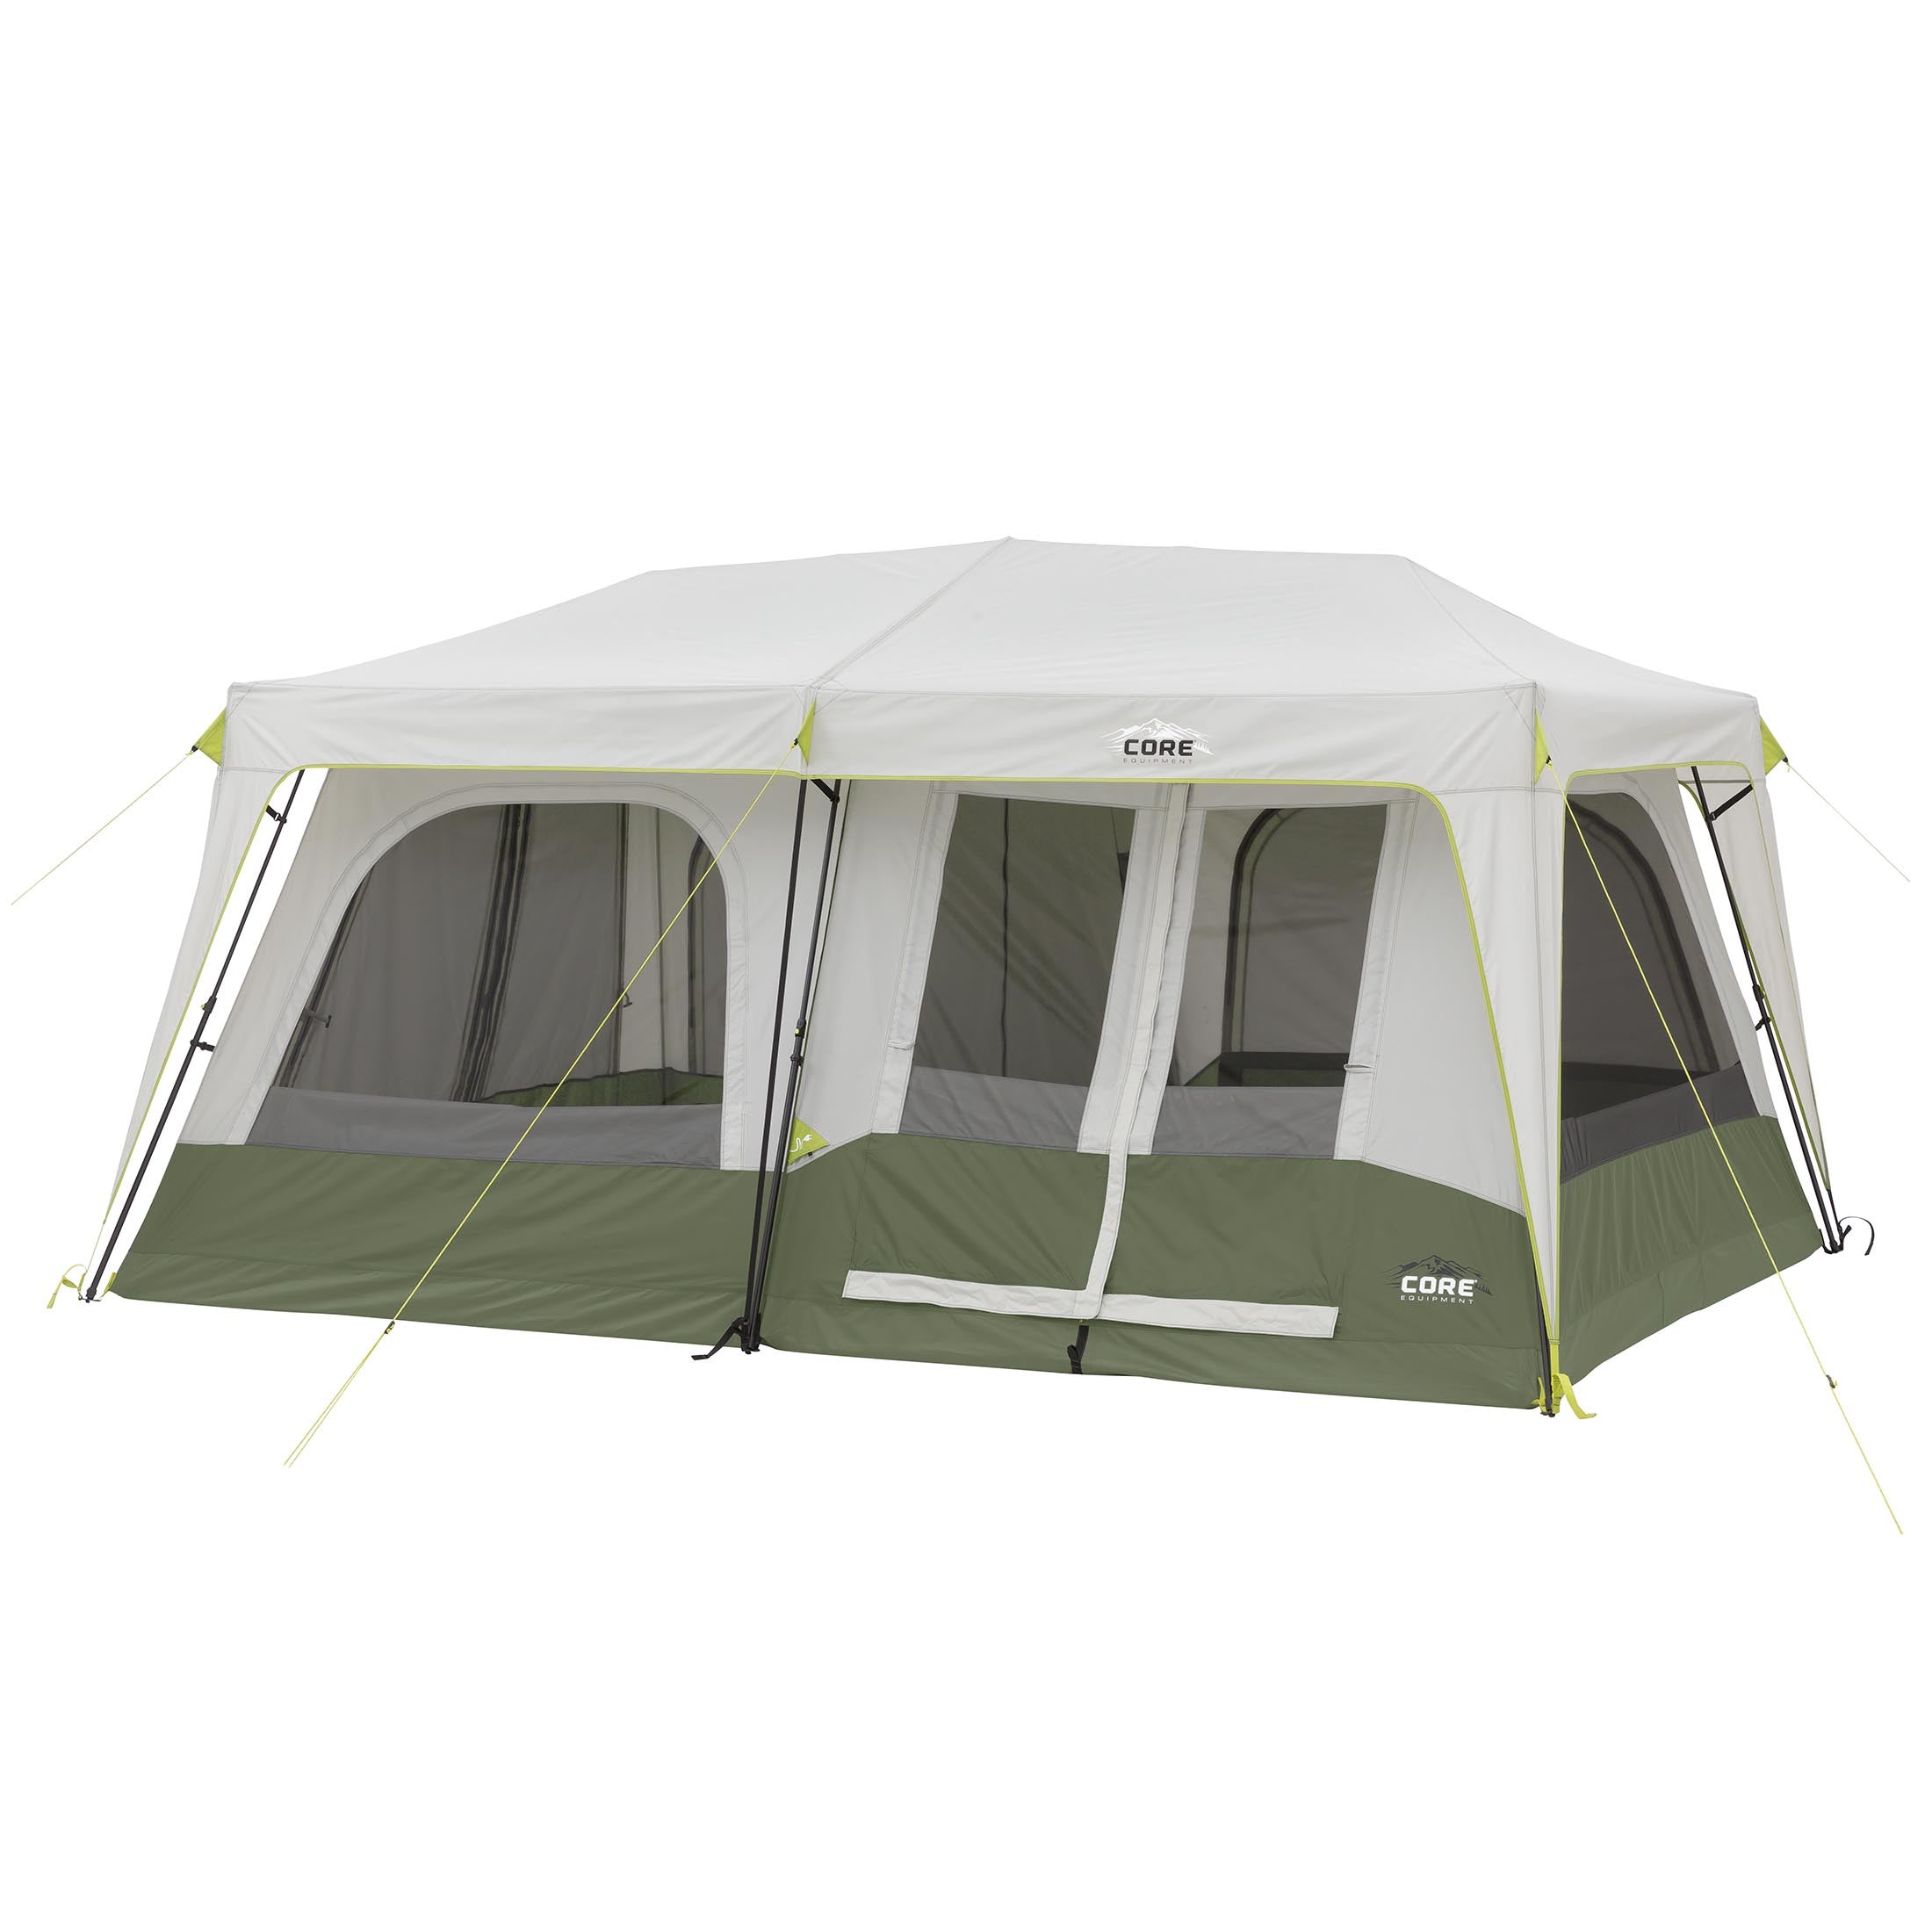 blow up tents for sale outdoor air camping extend Large Waterproof Family  inflatable house tent